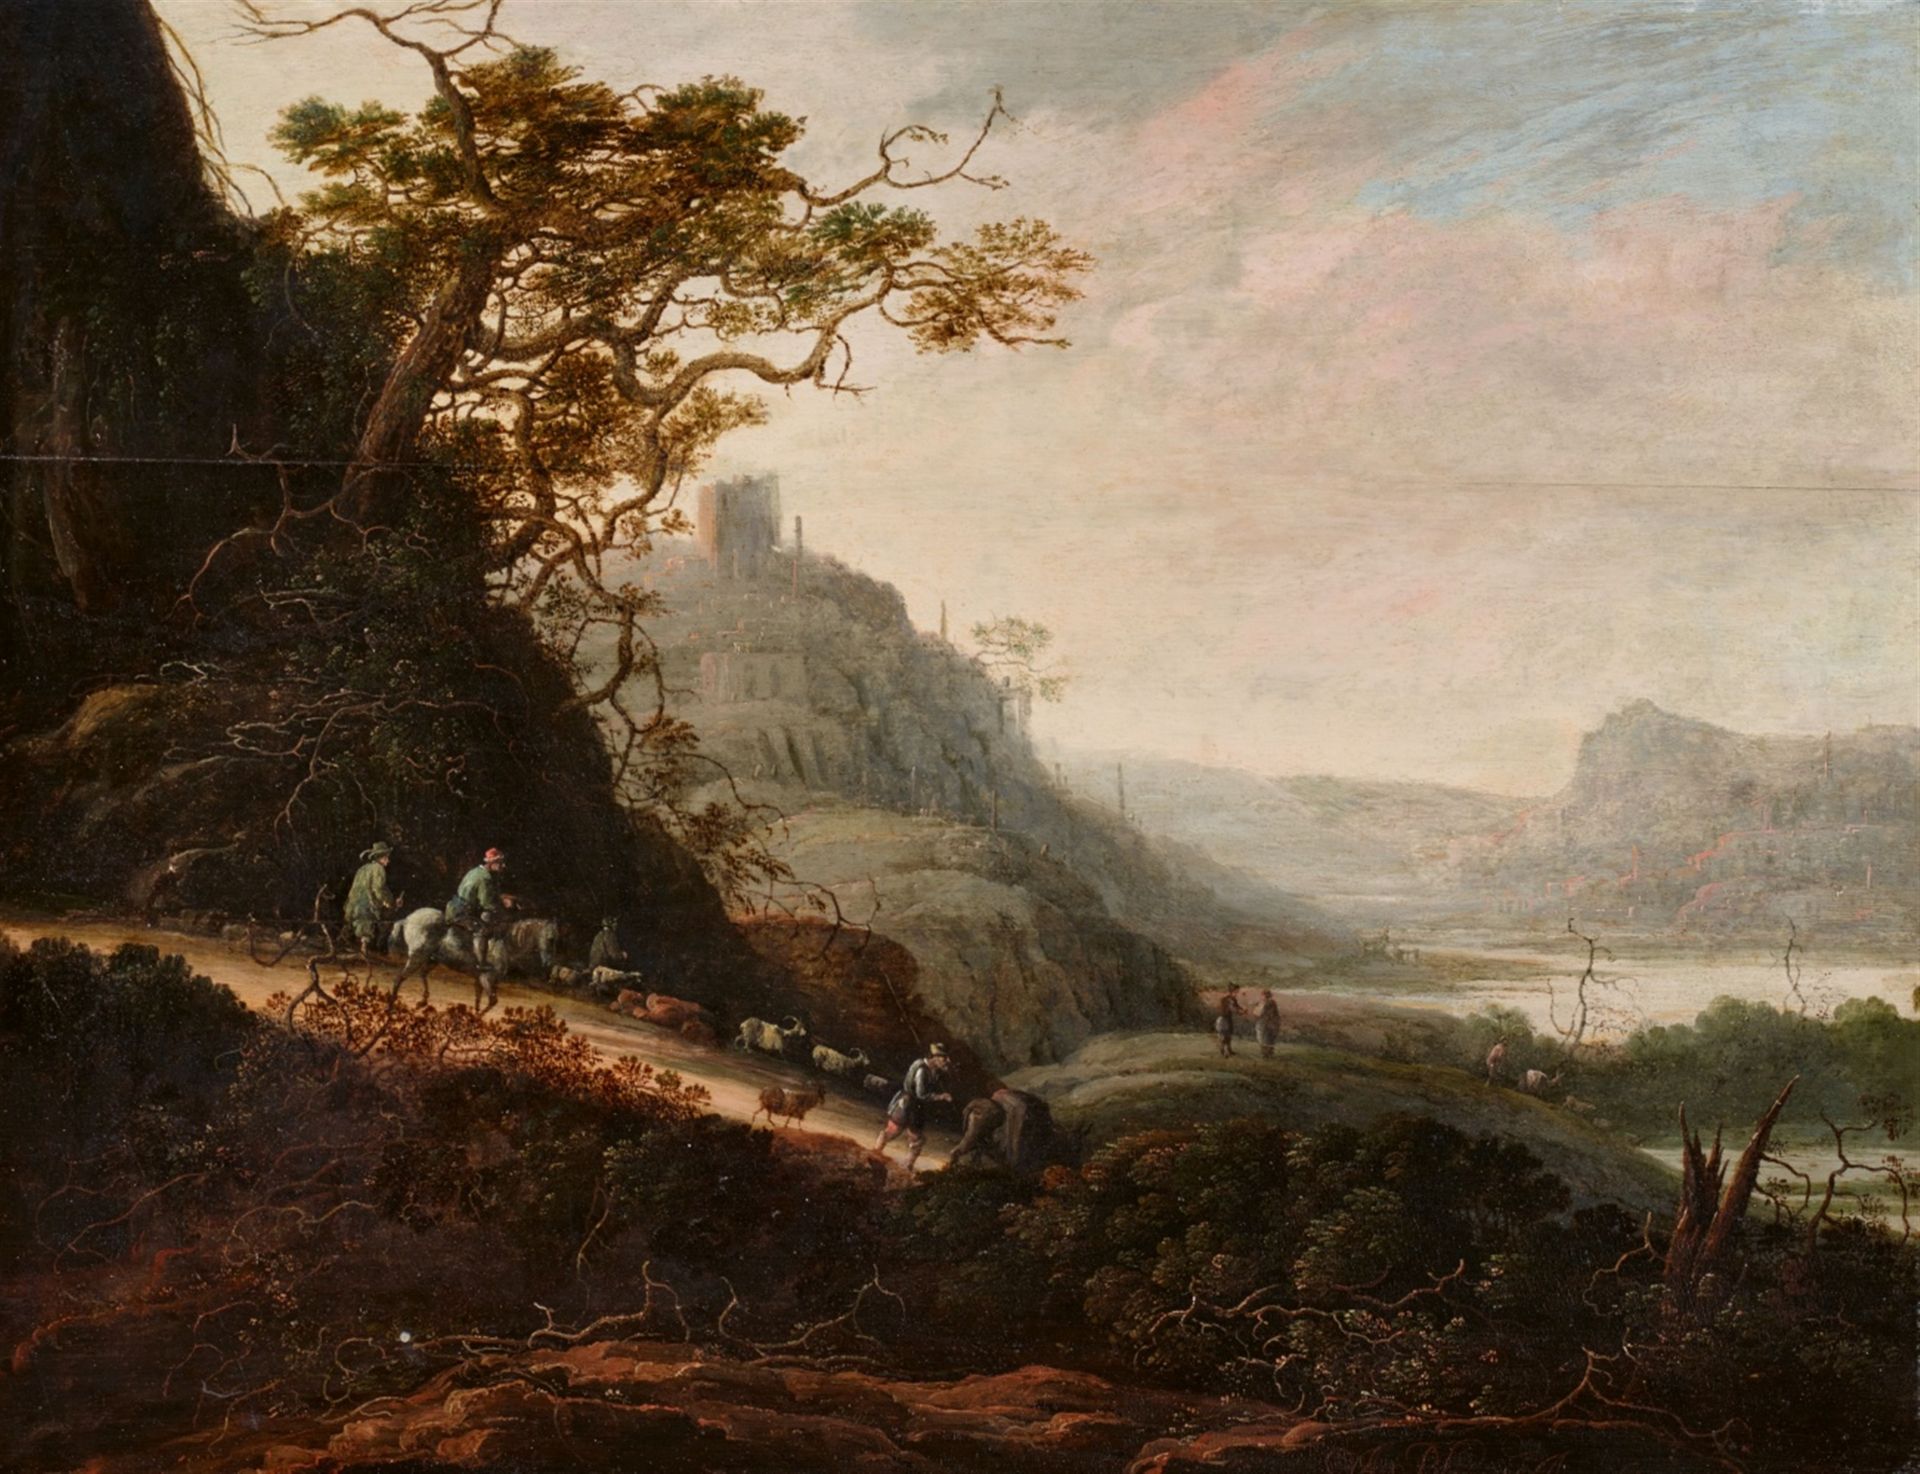 Adriaen Bloemaert, Landscape with Shepherds, Ruins and a Valley